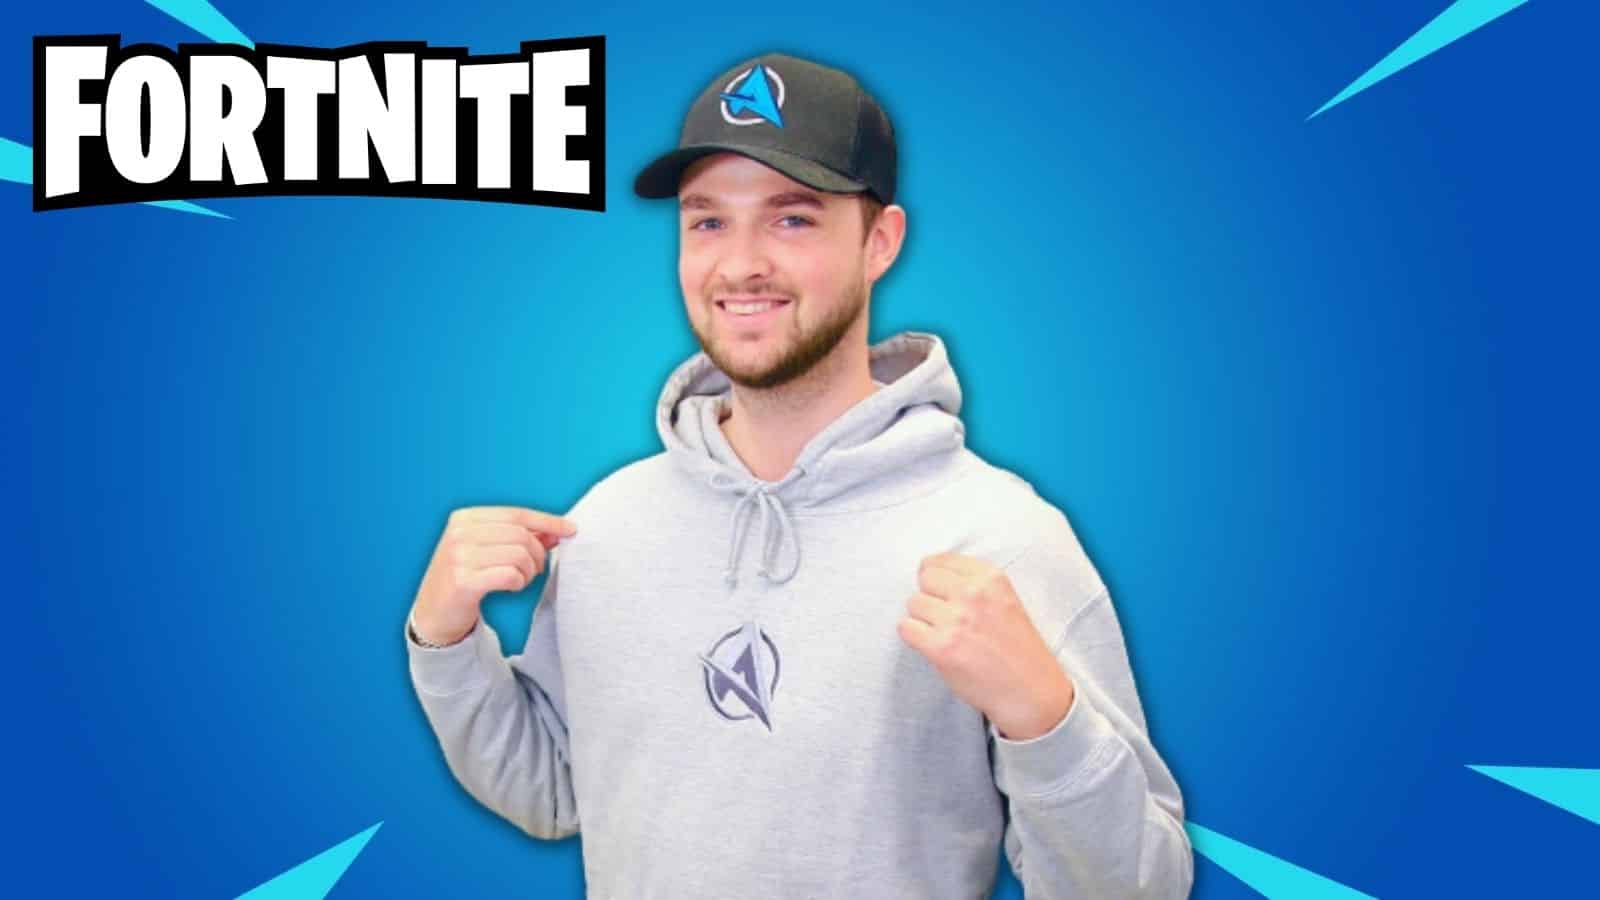 Ali-a on fortnite background with logo thumbnail